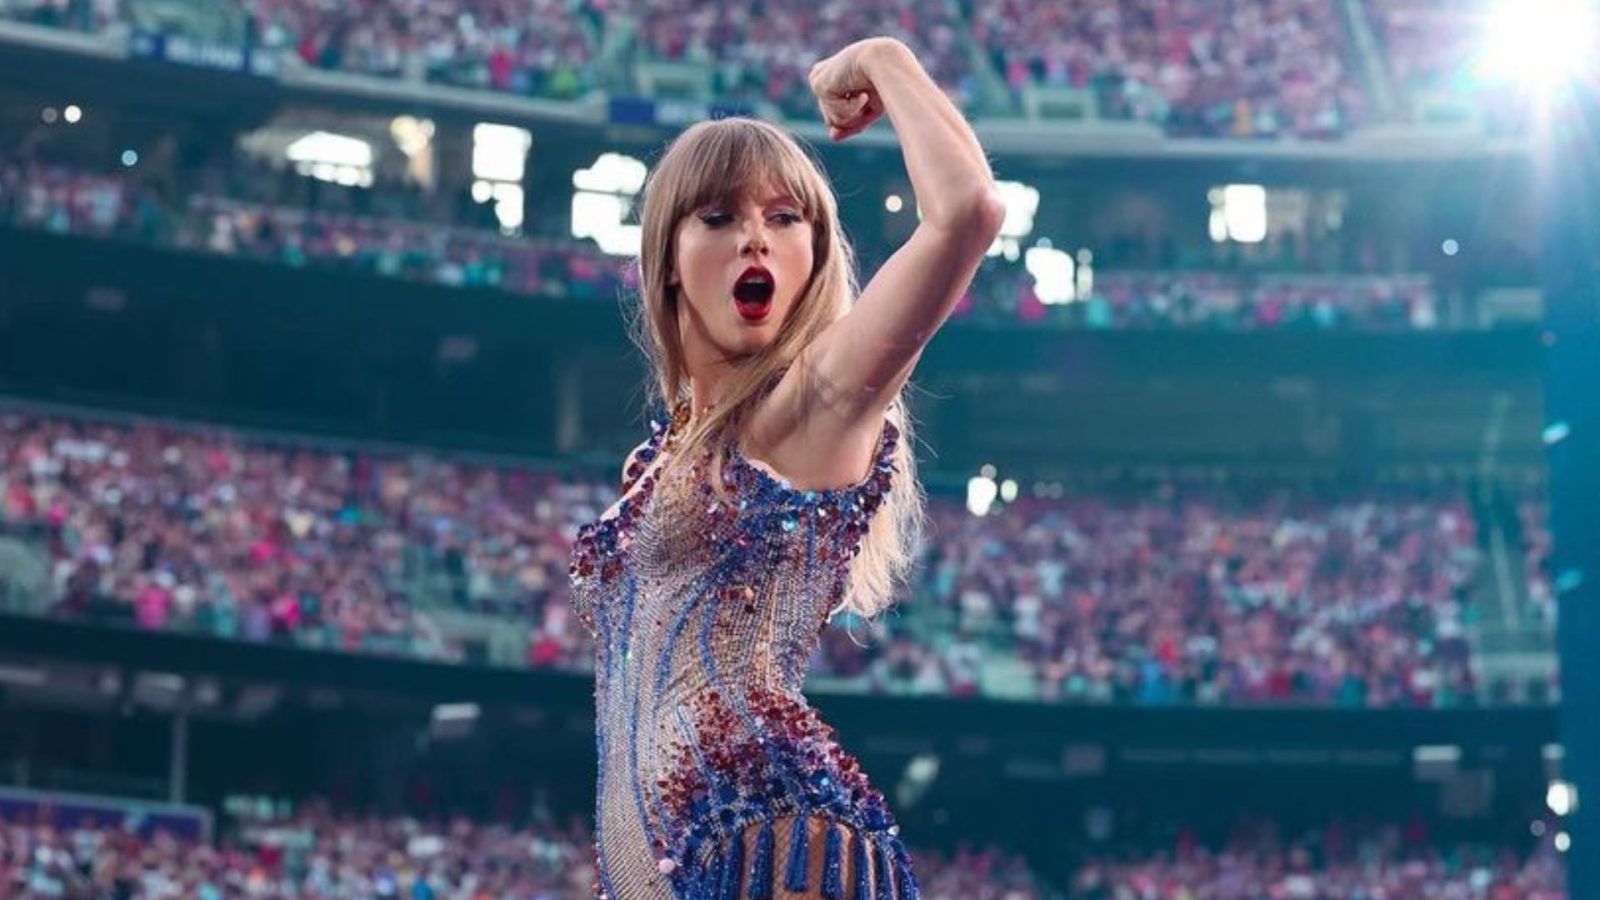 Here's everything you need to know on the Taylor Swift Singapore concert